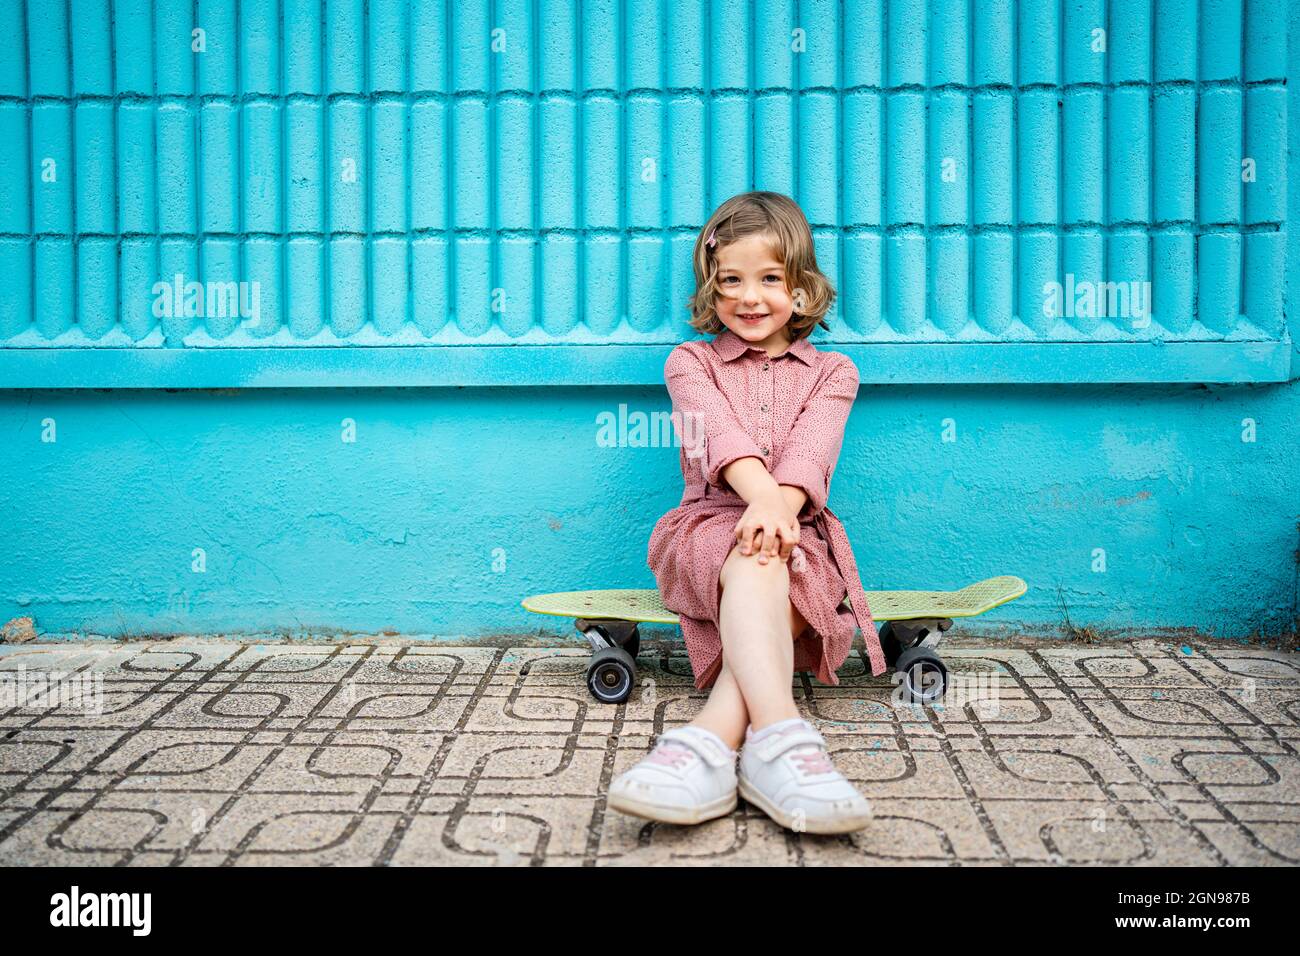 Smiling girl sitting with legs crossed at knee on skateboard in front of blue wall Stock Photo